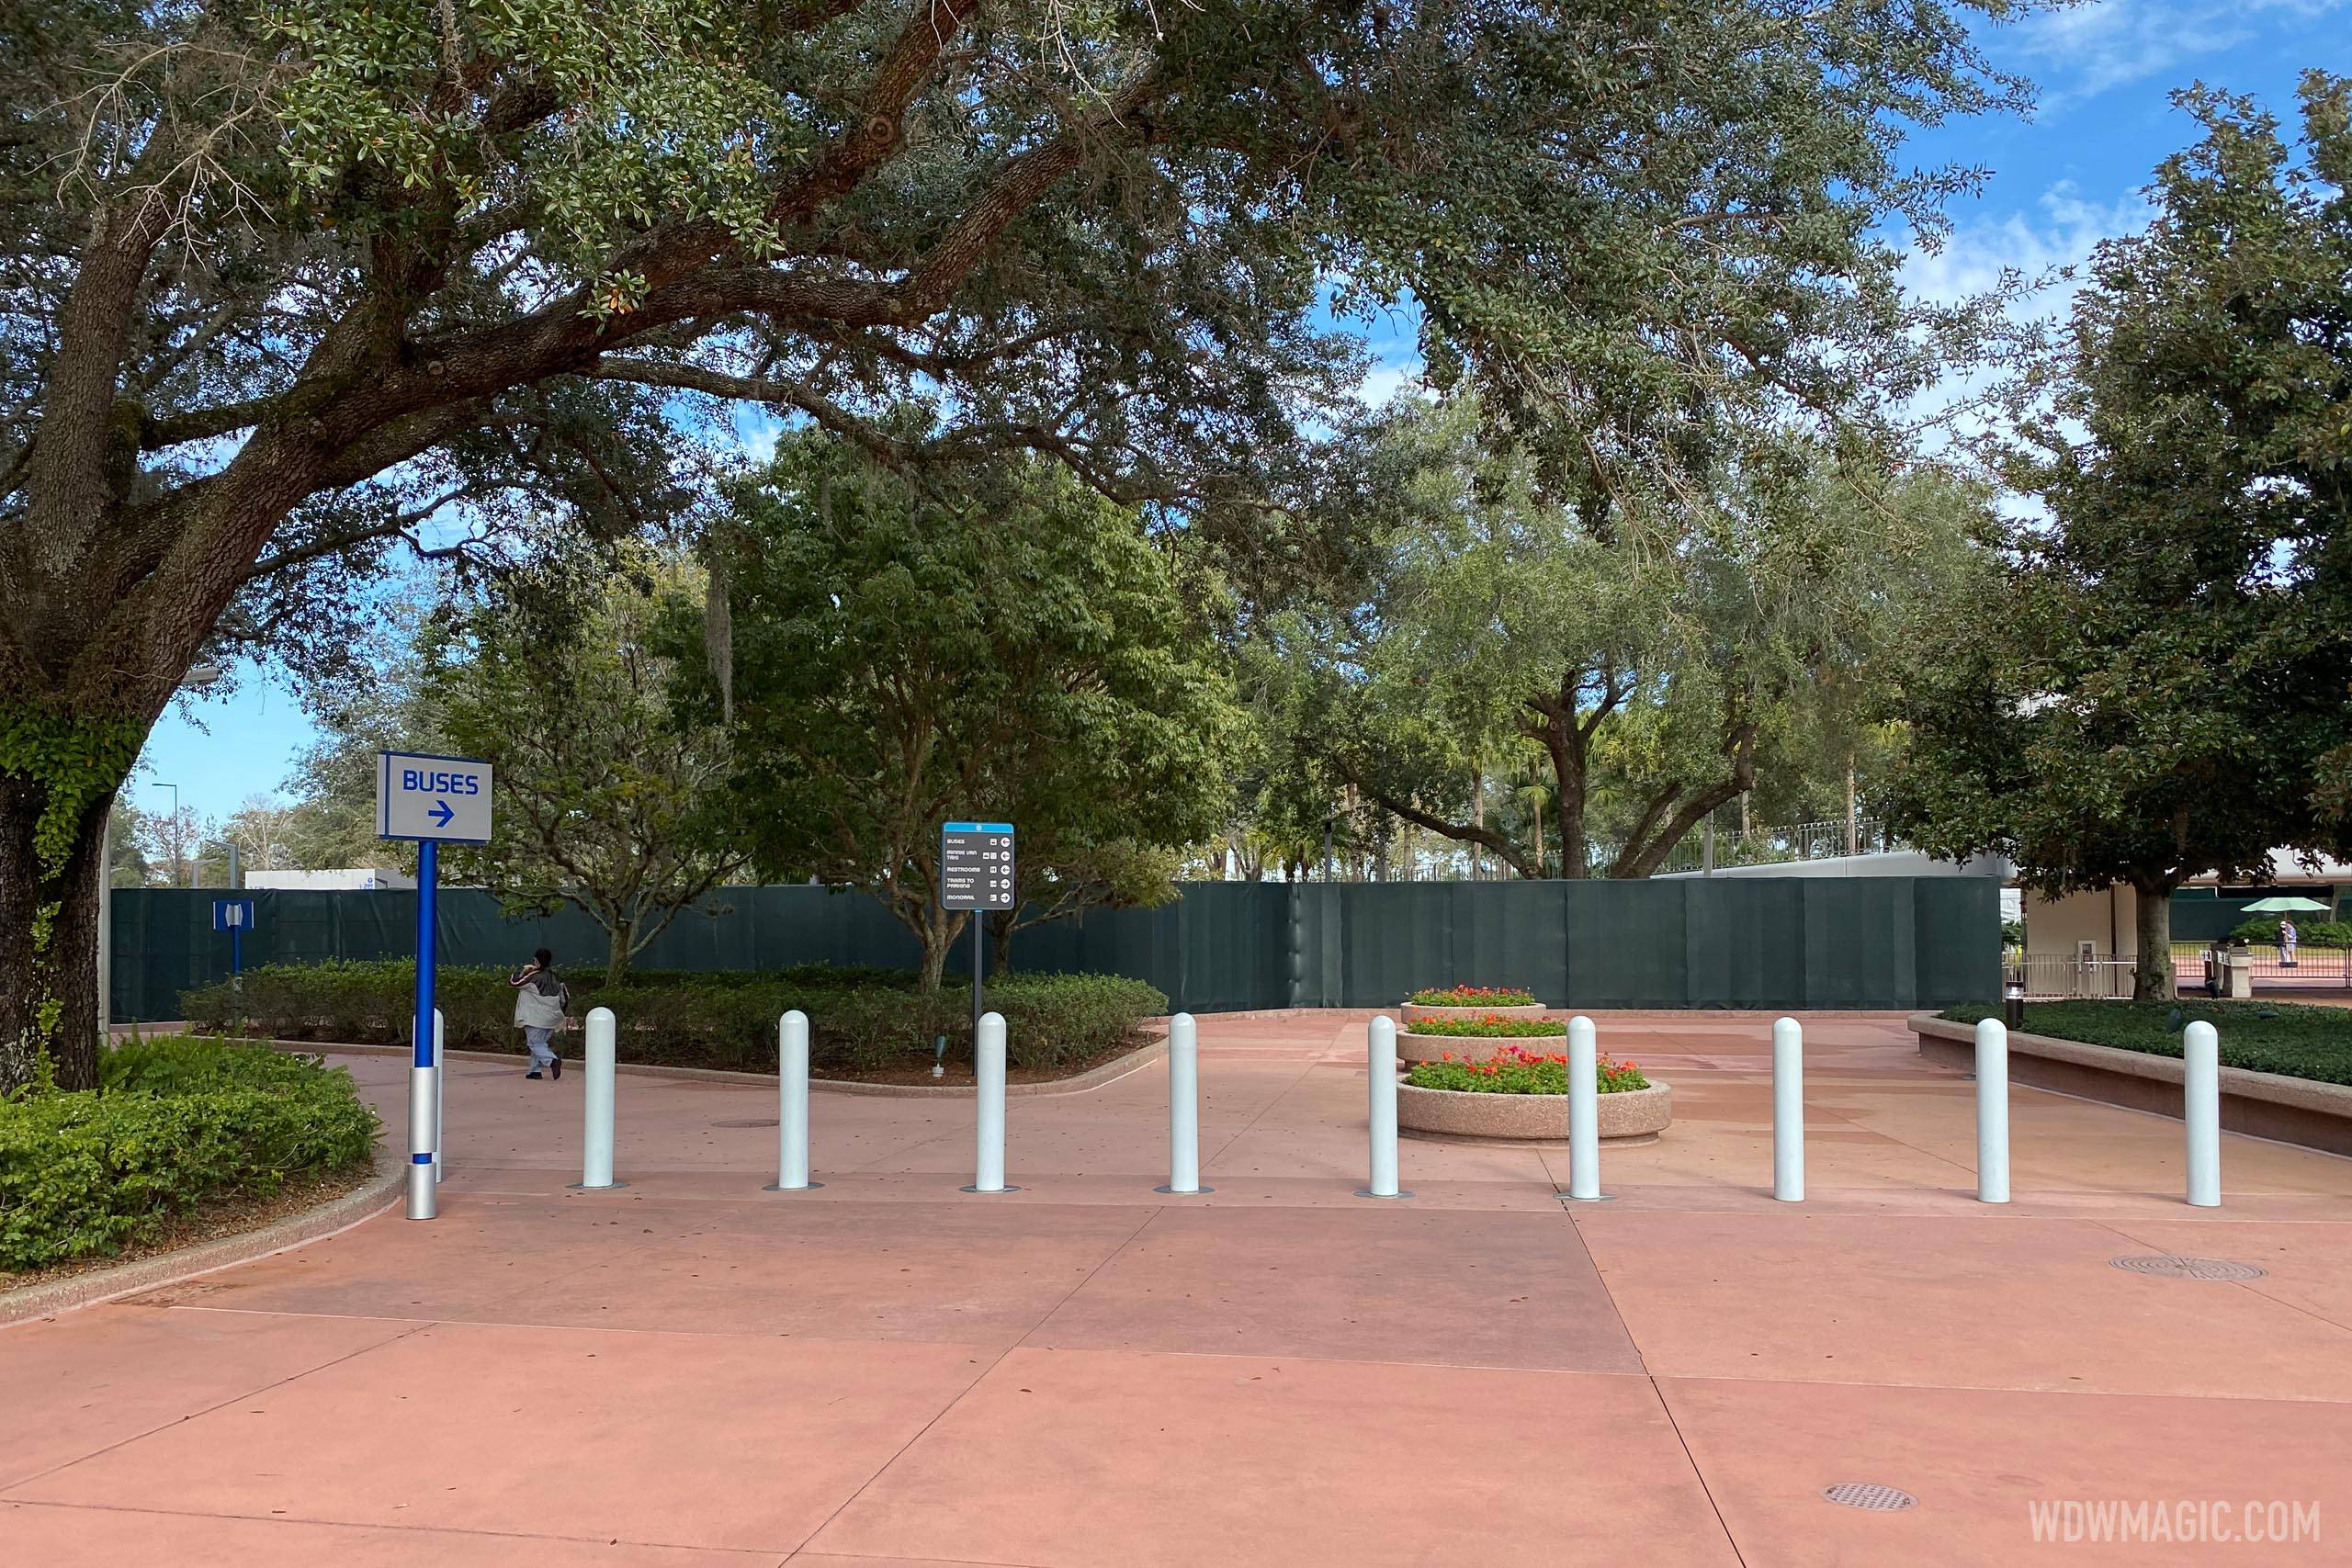 New Leave a Legacy site on the west side of the EPCOT entrance